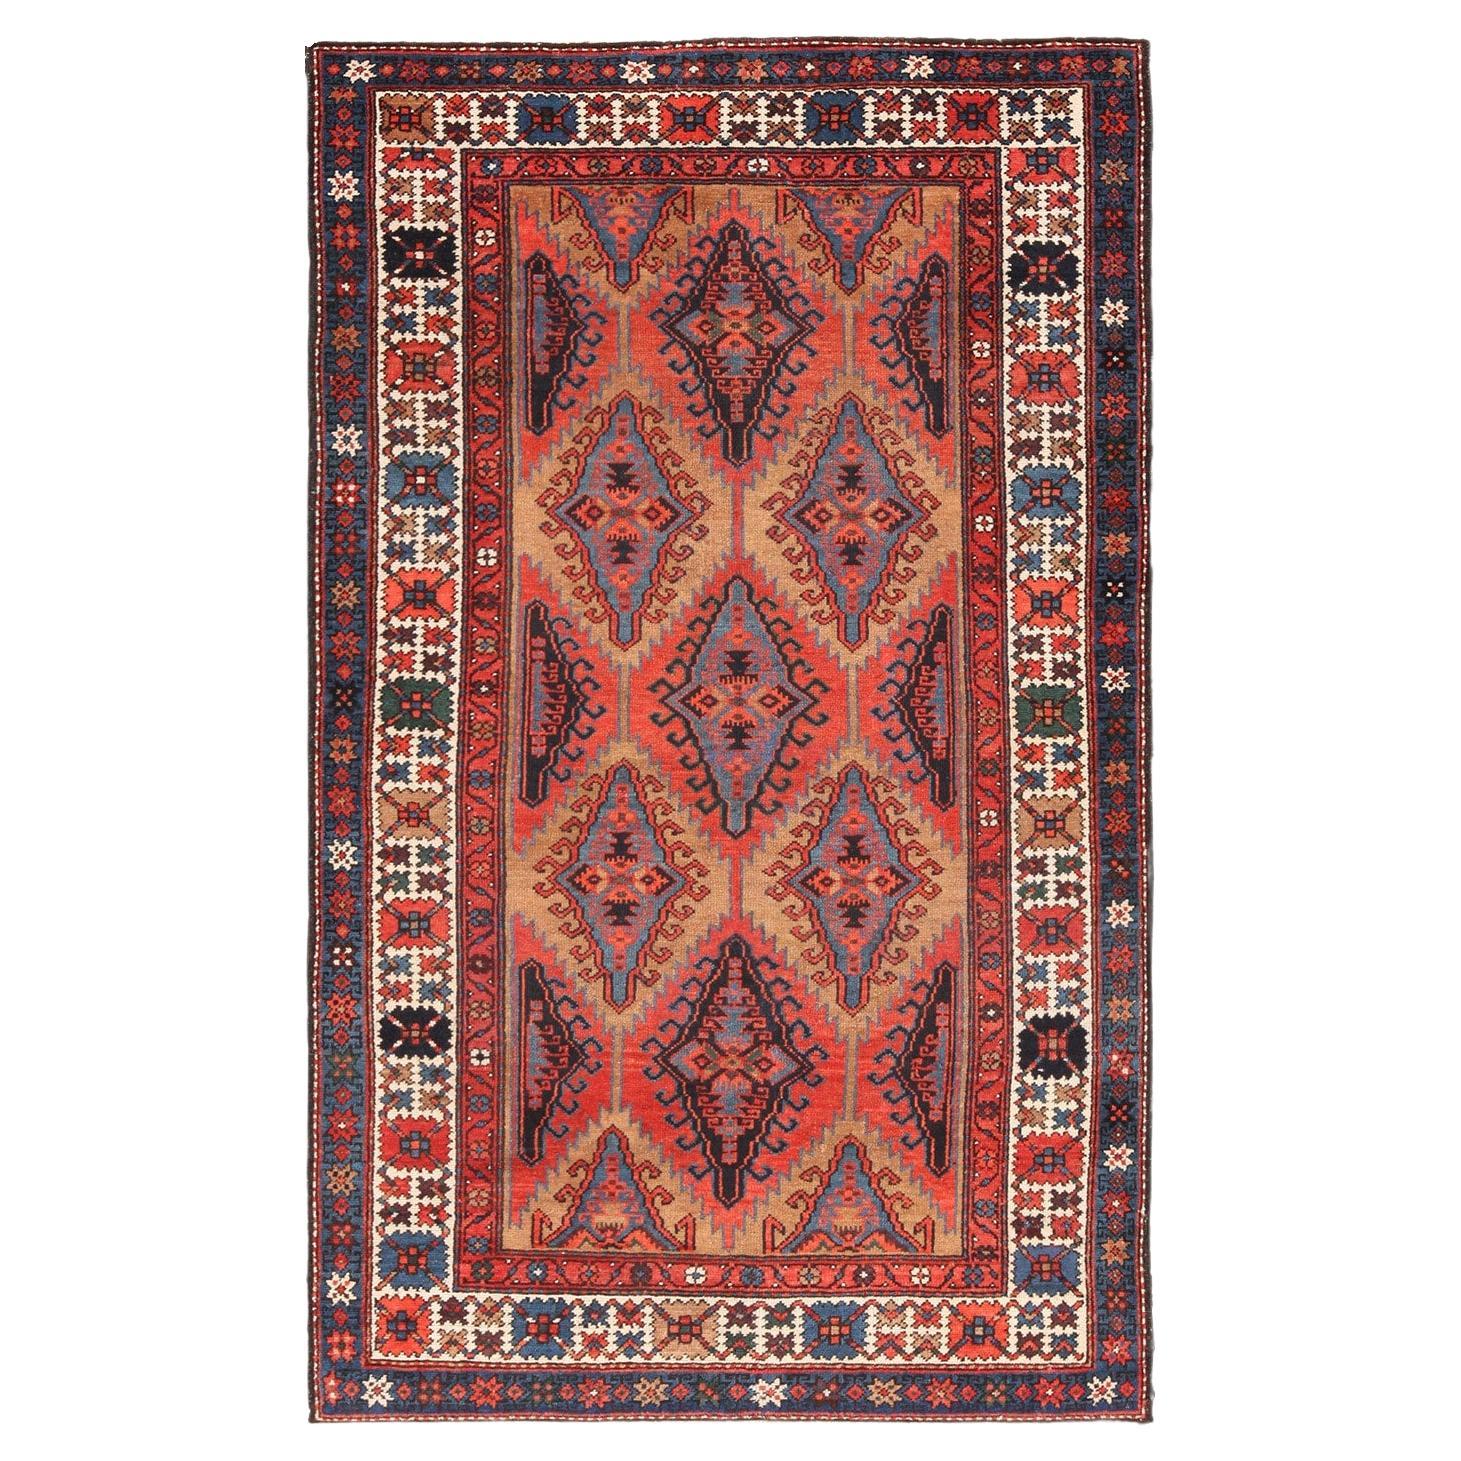 Antique Northwest Persian Rug. Size: 4 ft 6 in x 7 ft 